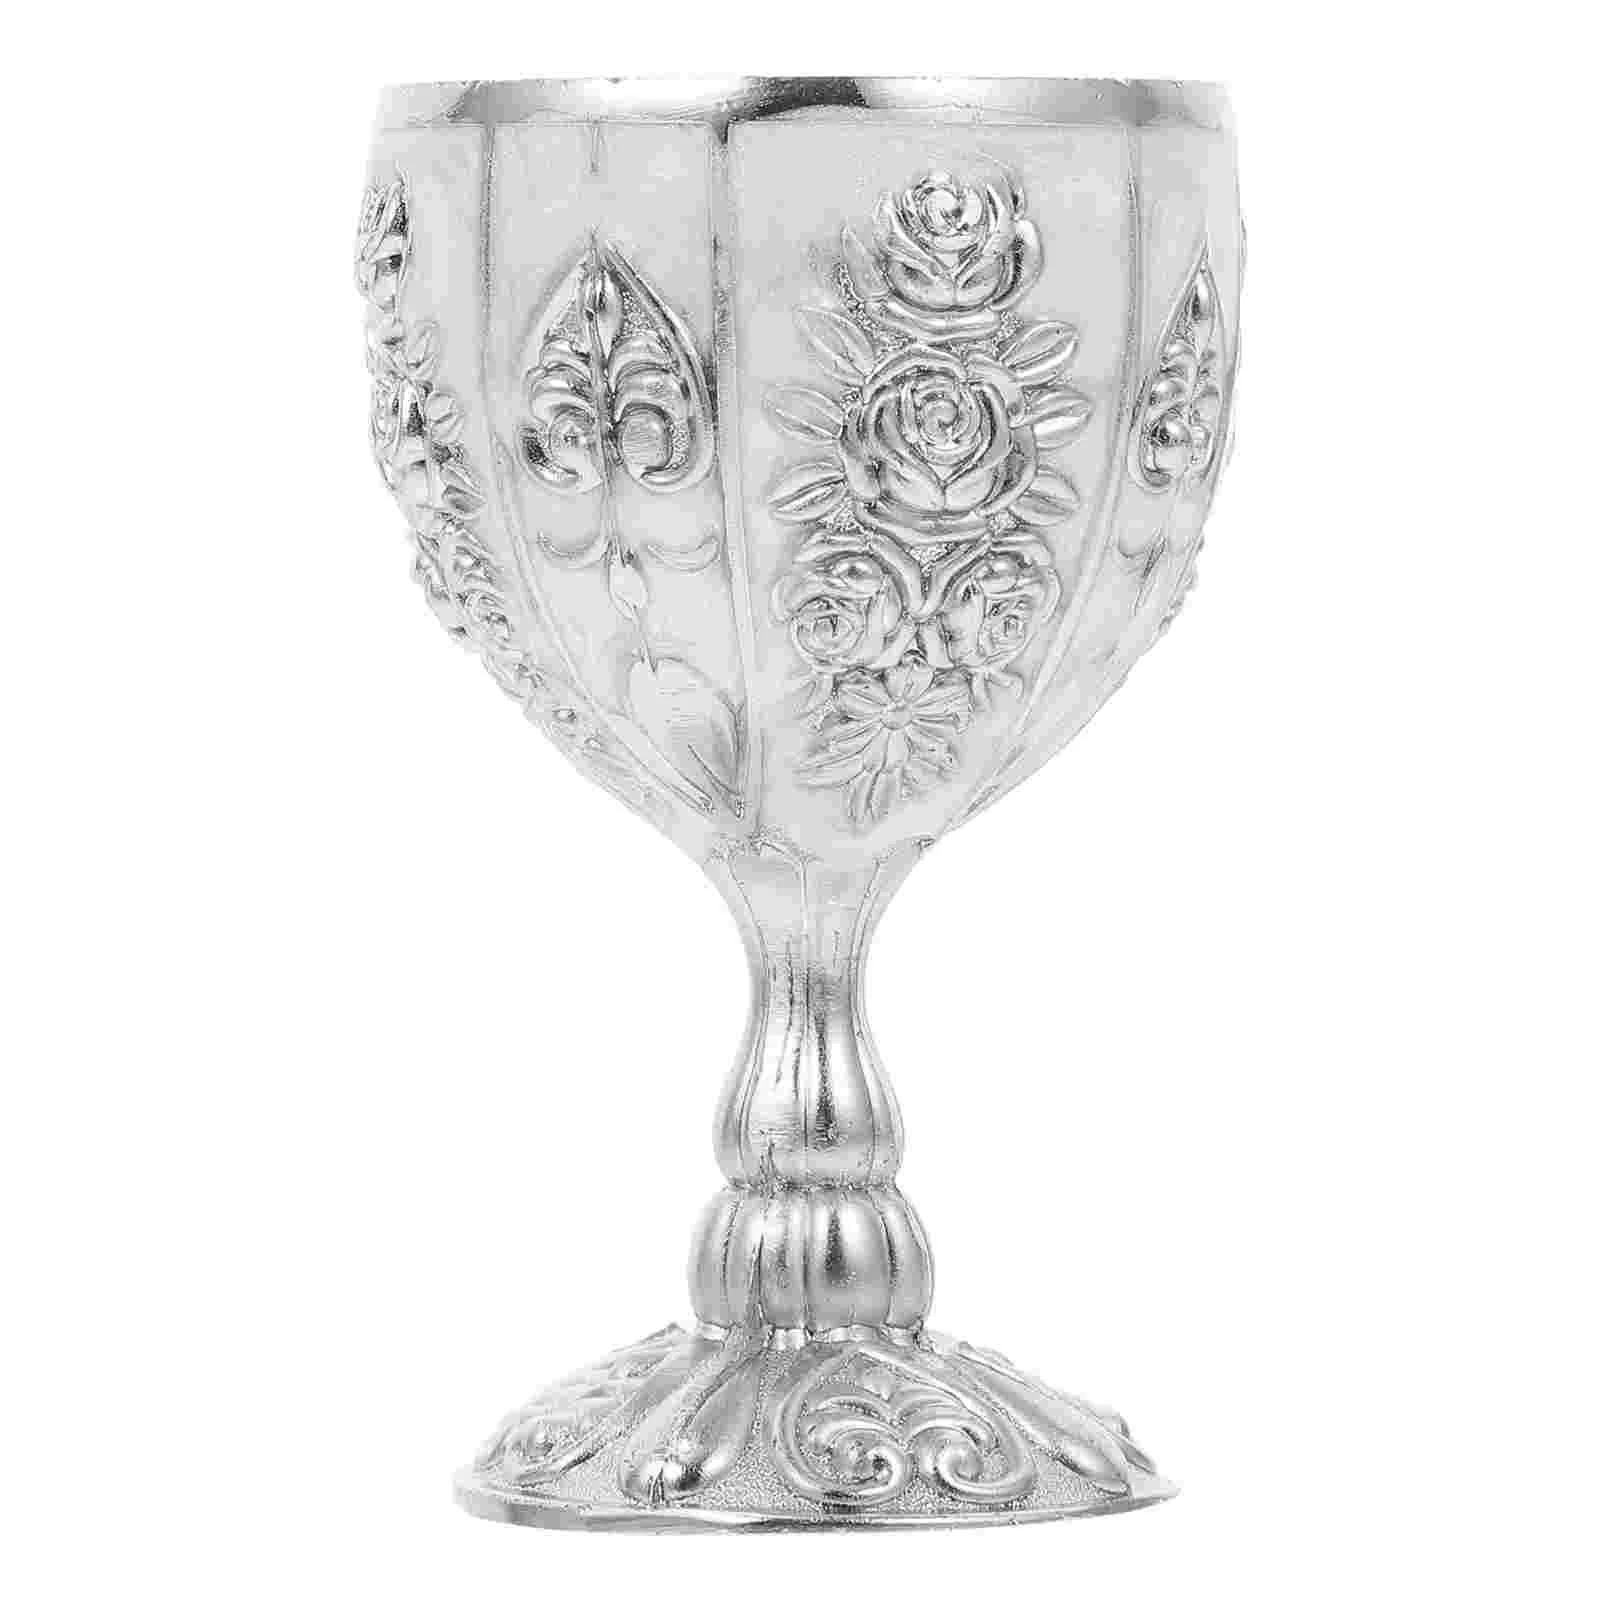 

Cup Goblet Chalice Glasses Vintage Cups Metal Medieval Retro Champagne European Cocktail Shot Royal Drinking Goblets Style Brass